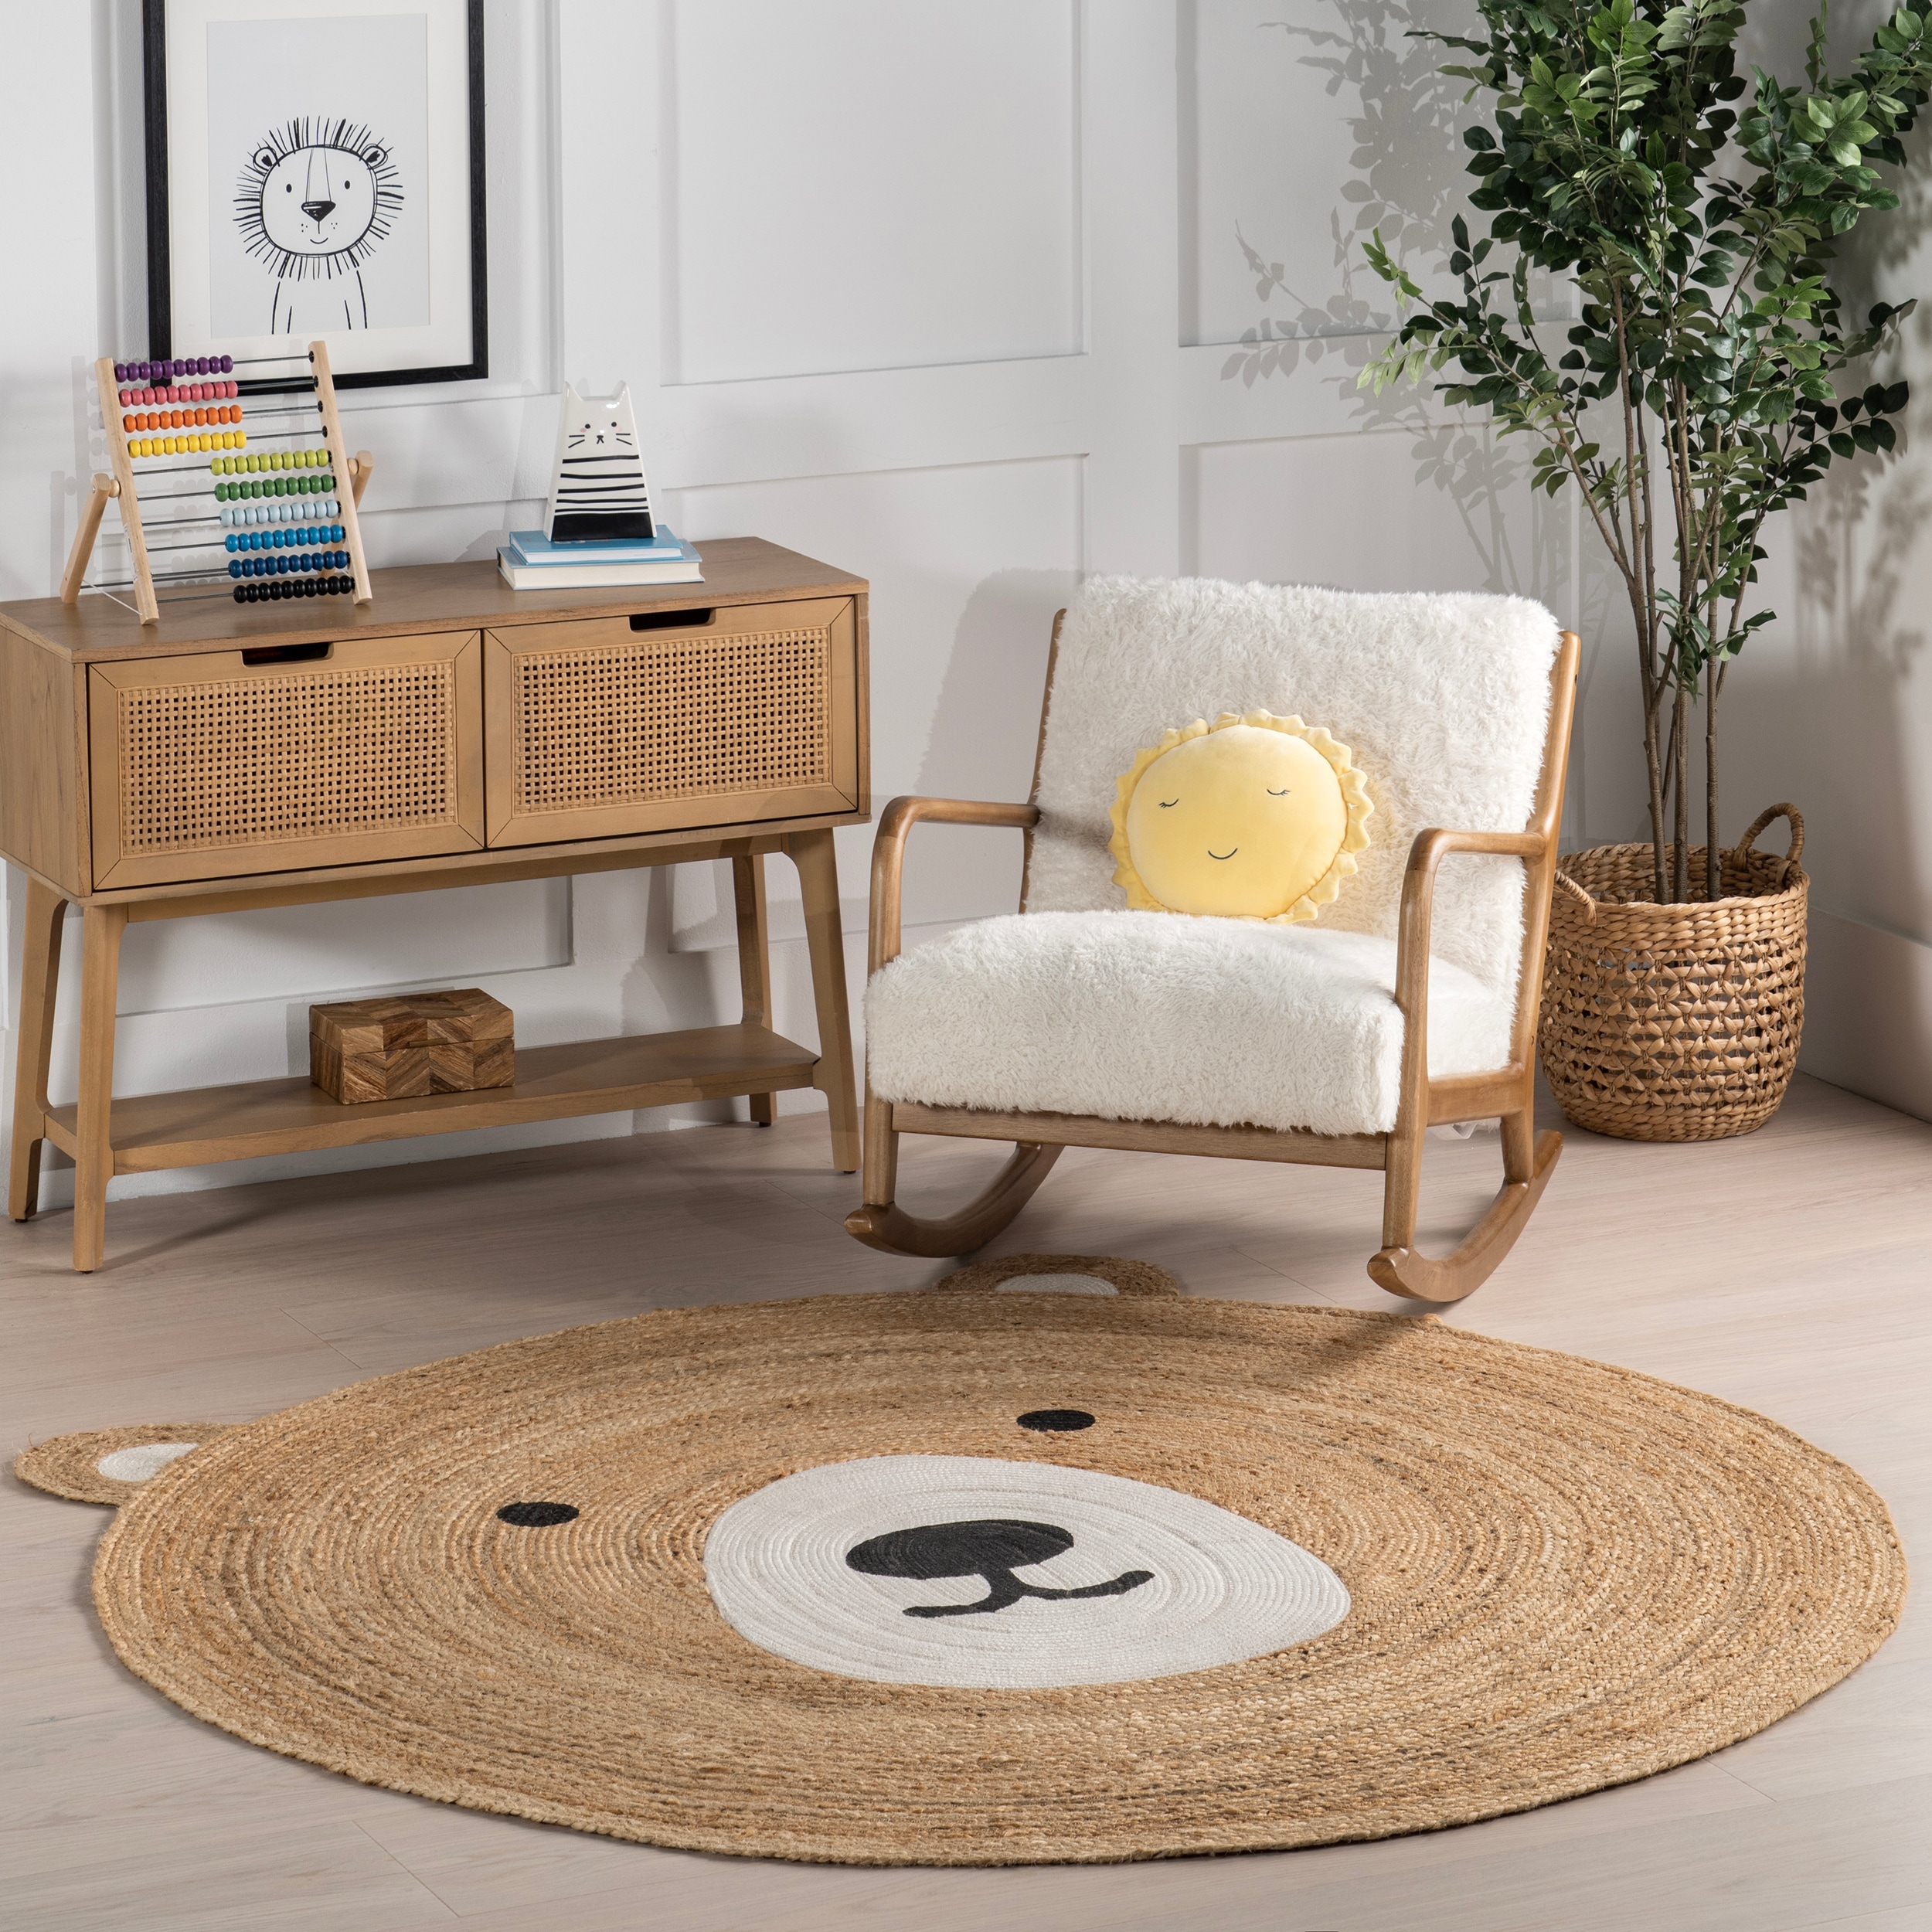 https://ak1.ostkcdn.com/images/products/is/images/direct/0515bae373009ee2f2744034b601b5a03ccec0d5/Brooklyn-Rug-Co-Ravenna-Bear-Handwoven-Kids-Jute-Area-Rug.jpg